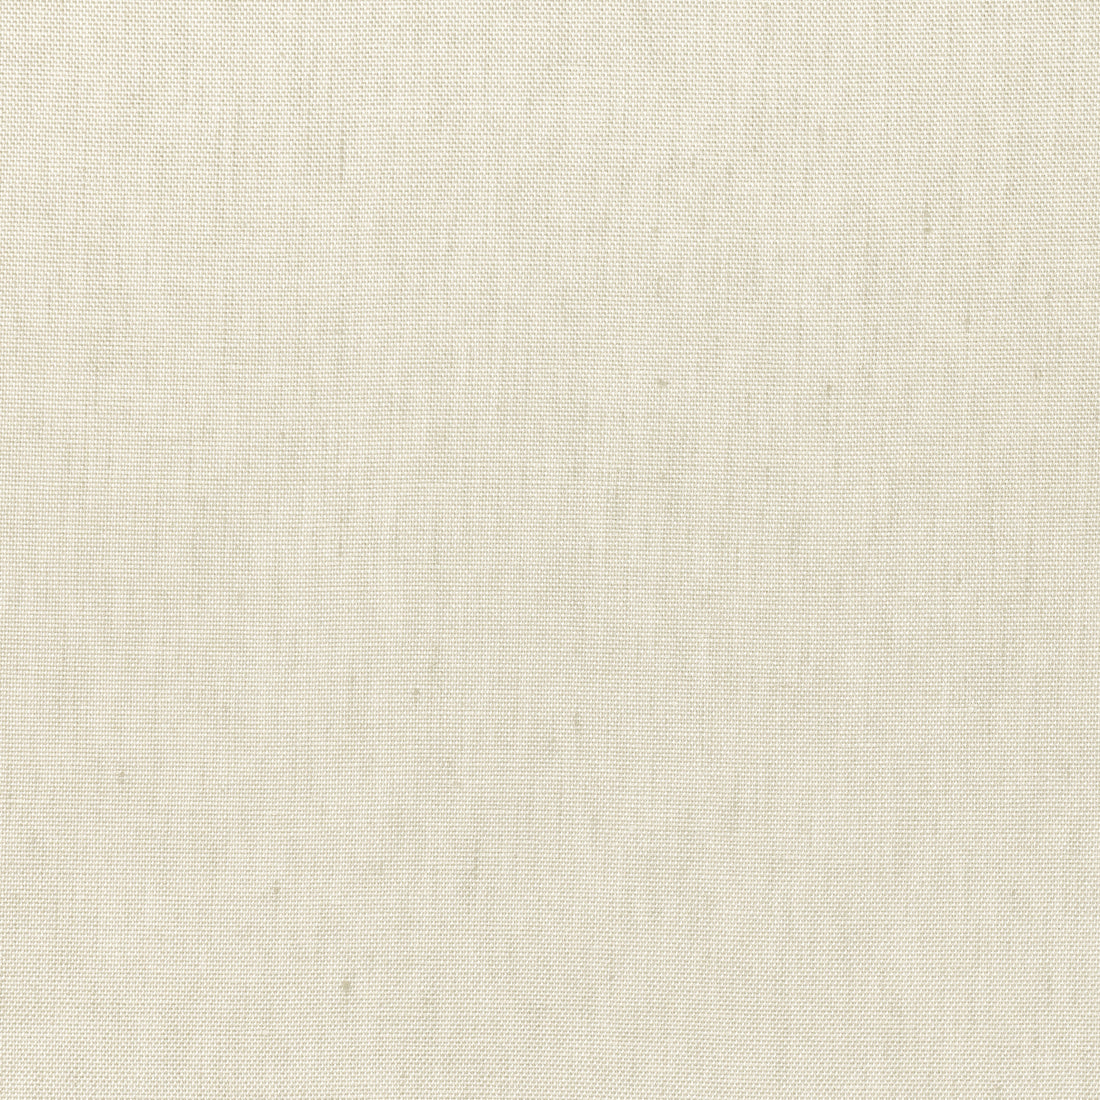 Skye Linen fabric in linen color - pattern number FWW7606 - by Thibaut in the Palisades collection